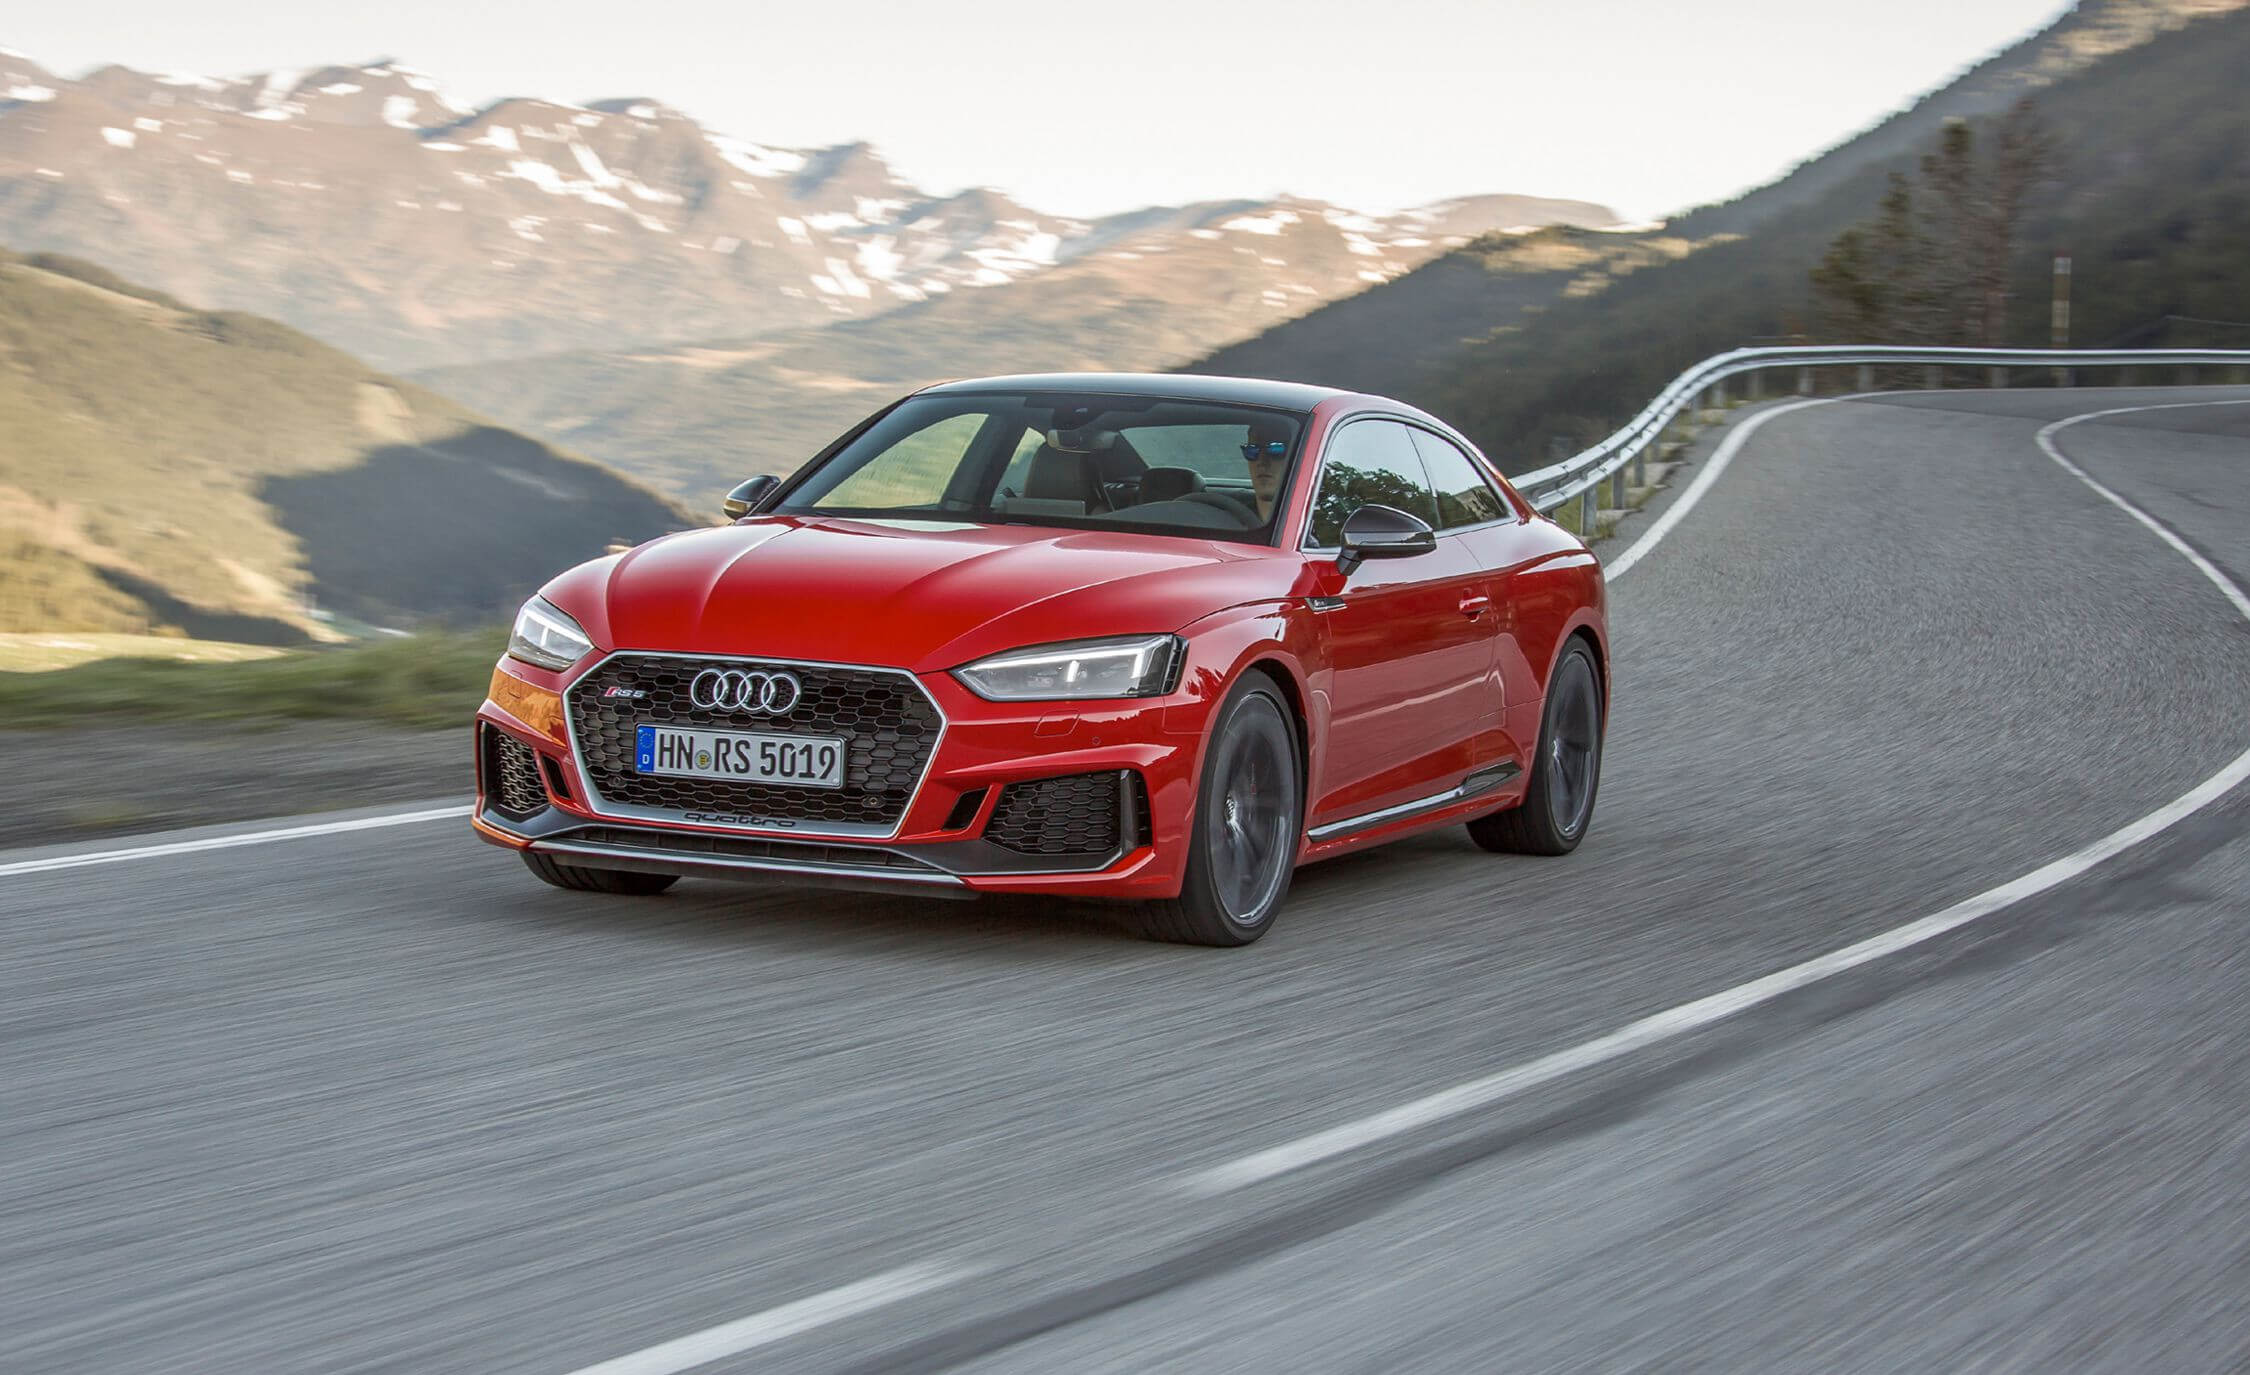 The Future 2019-2020 Audi Rs5 Front Wallpaper Hd - Audi Rs5 , HD Wallpaper & Backgrounds